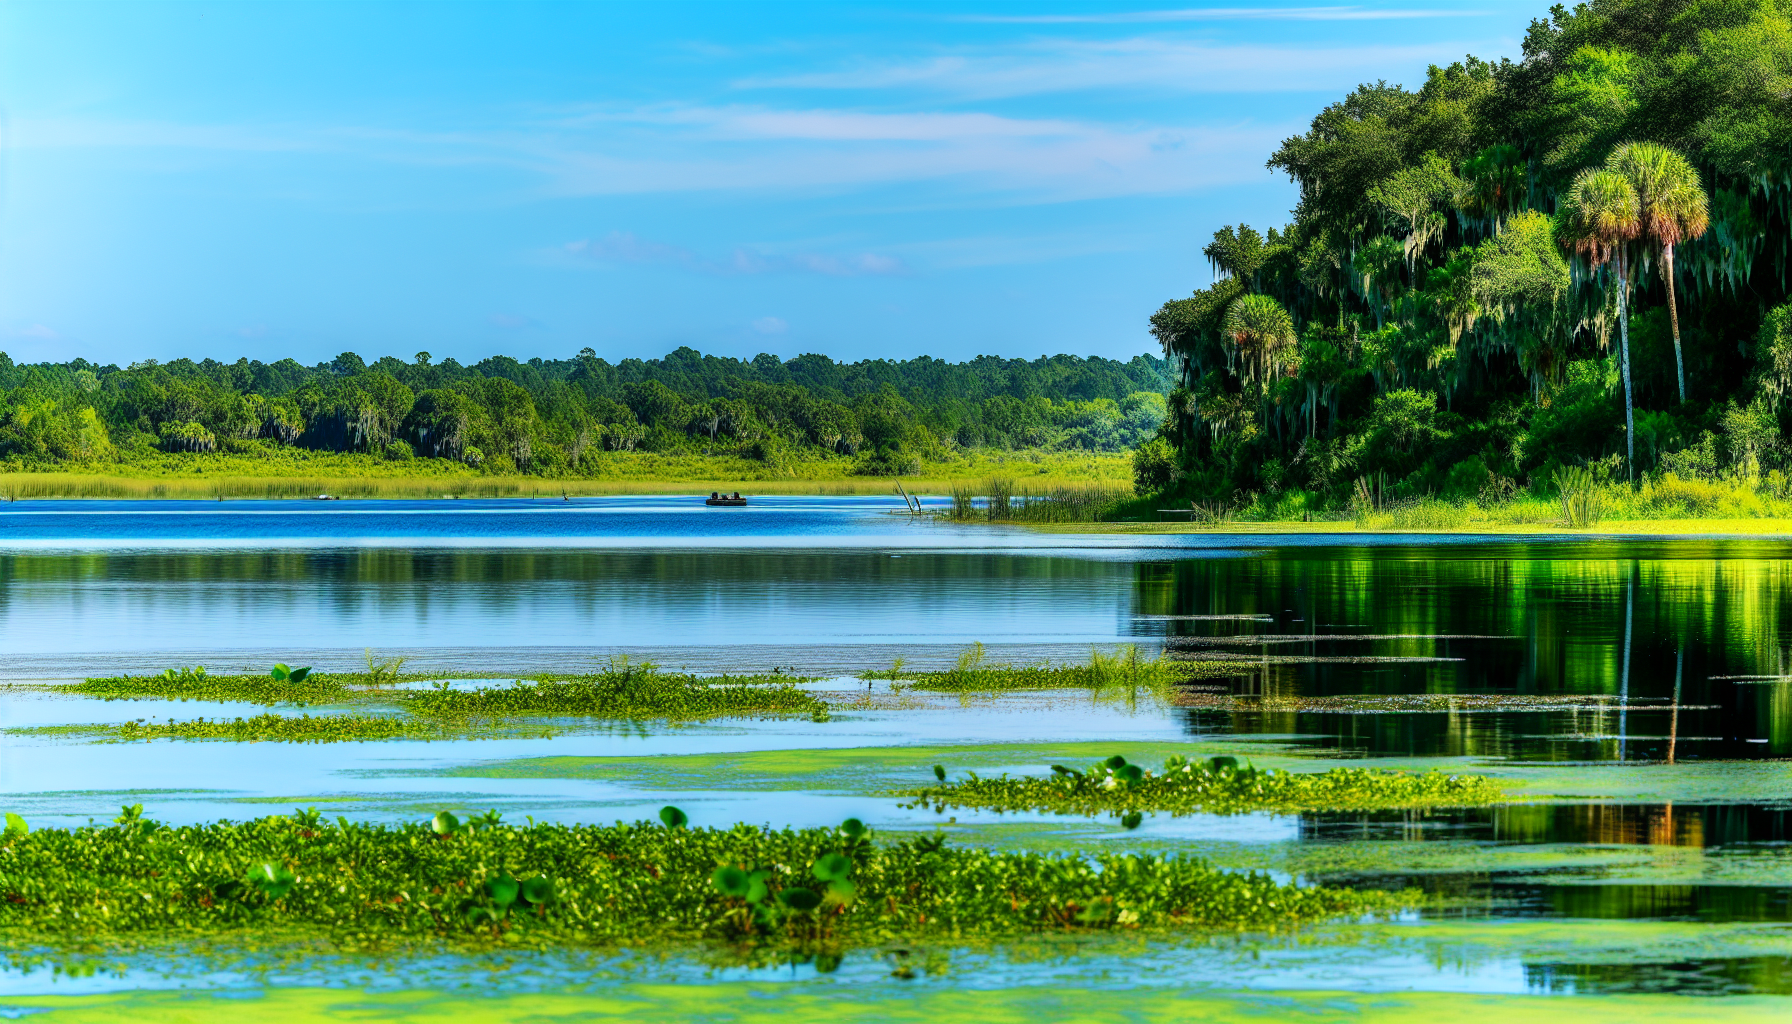 A serene lake with green vegetation, ideal for bass fishing in Florida